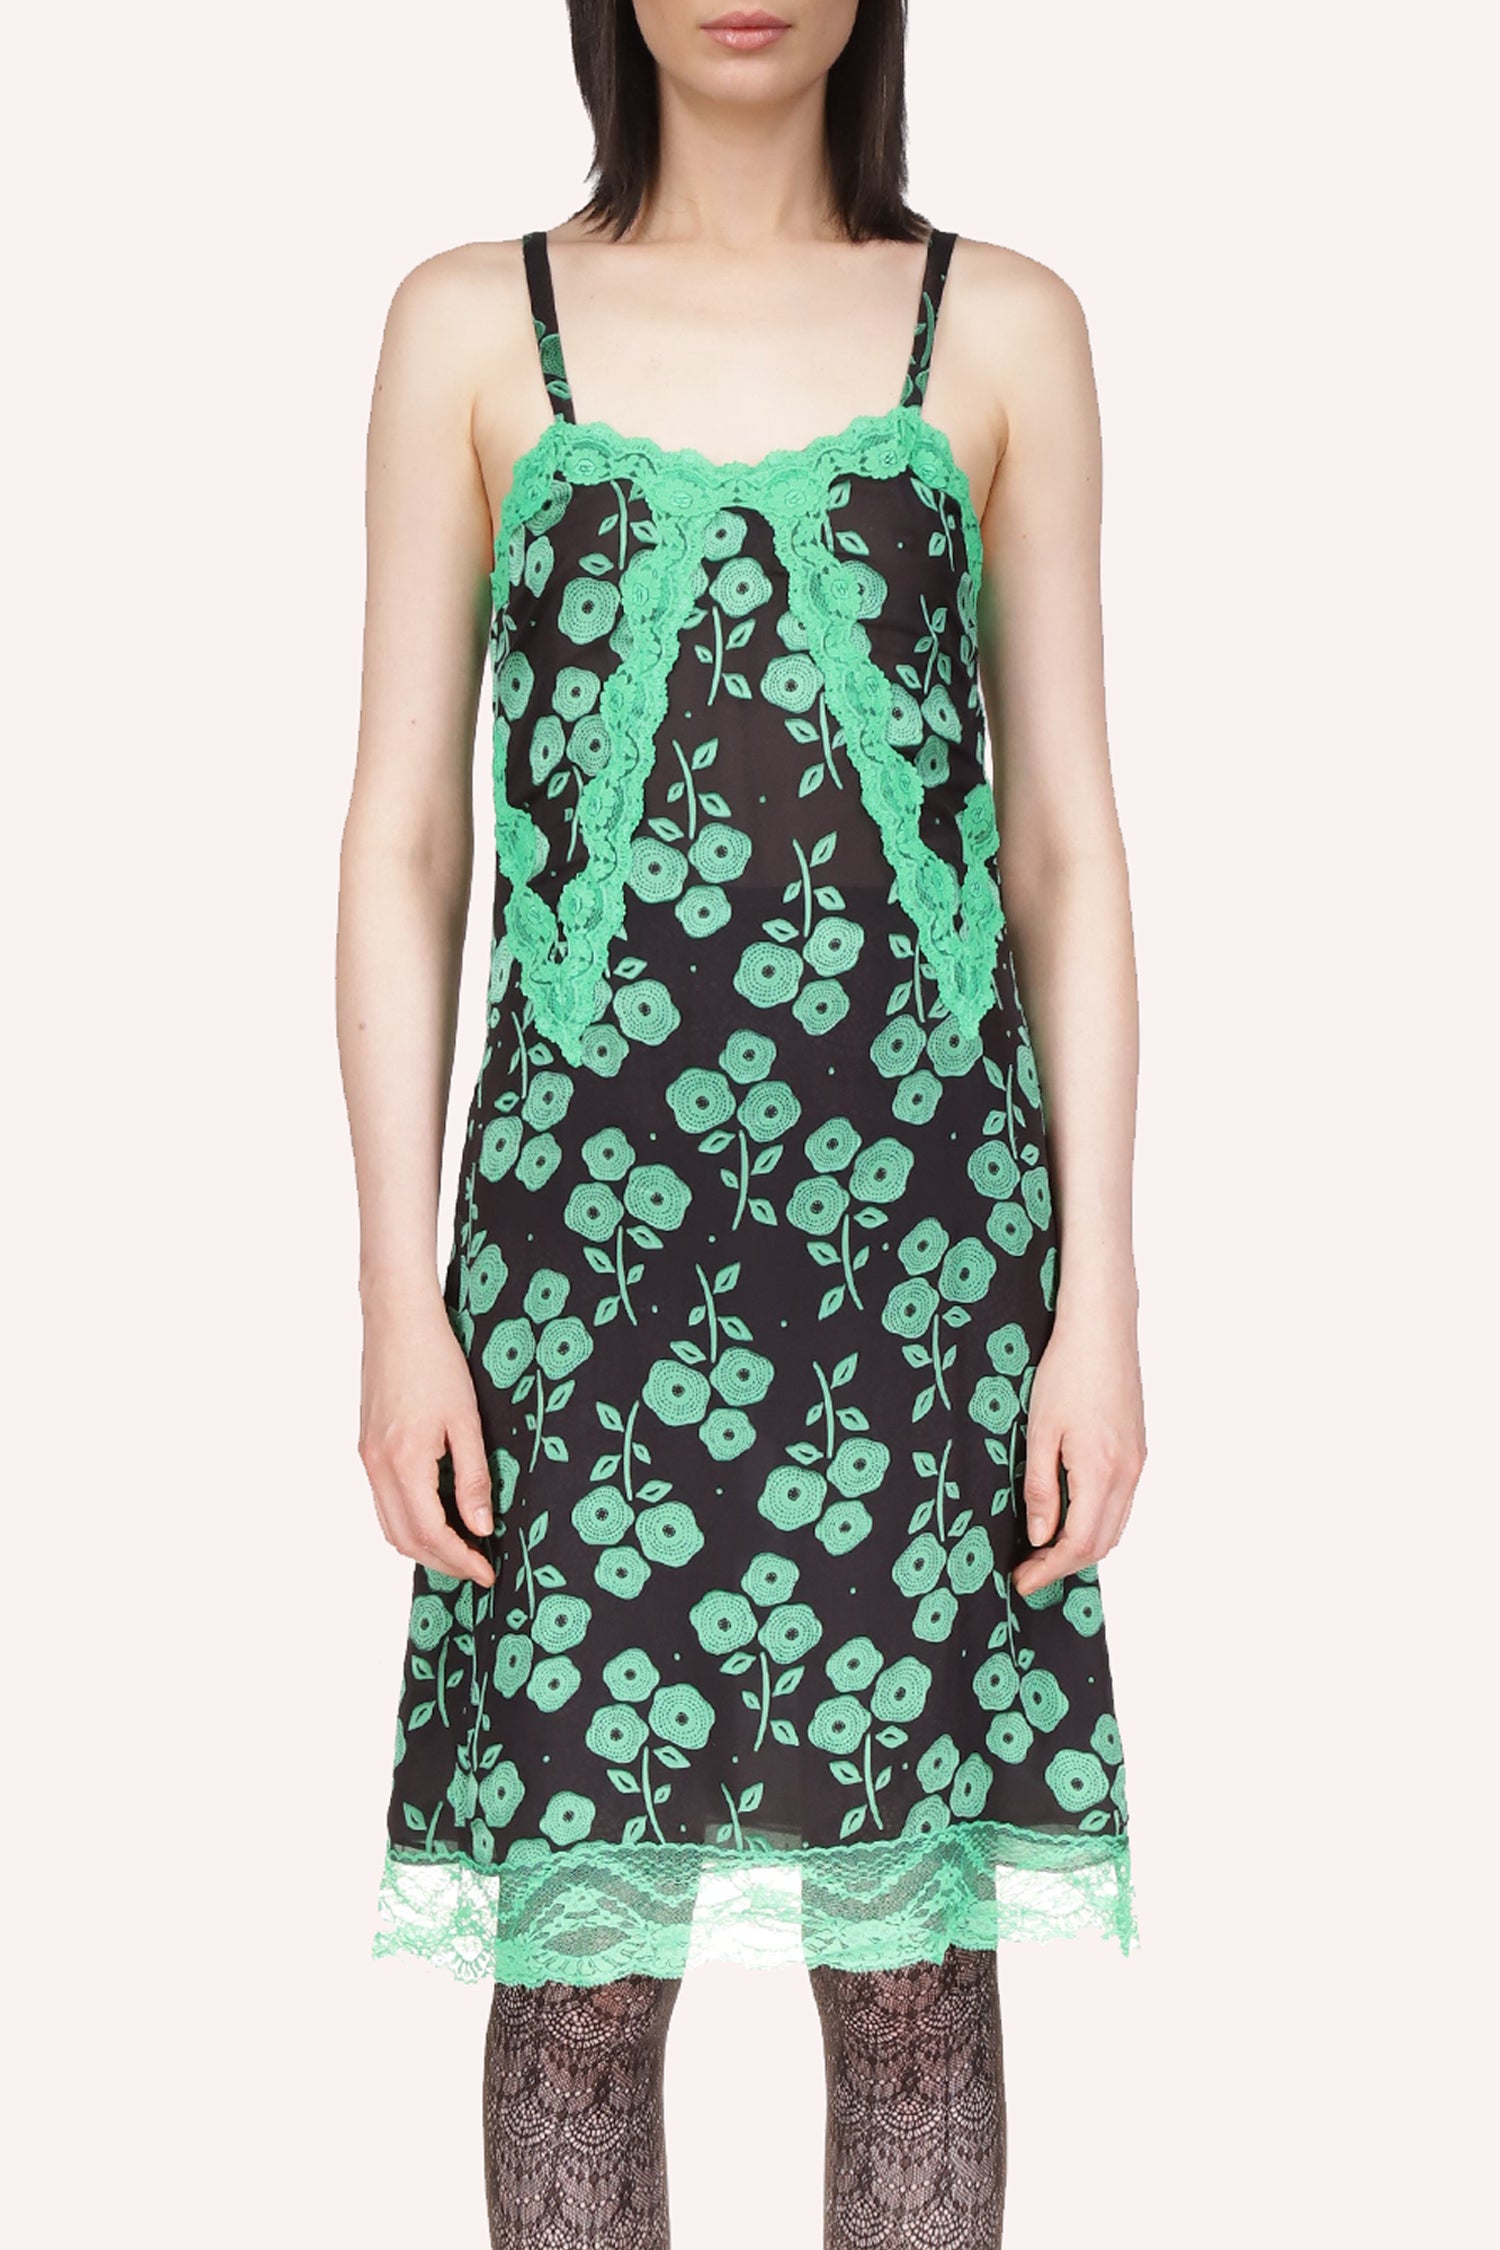 Black dress, green floral pattern, green v-lace, sleeveless, straps, knees-long, green lace bottom